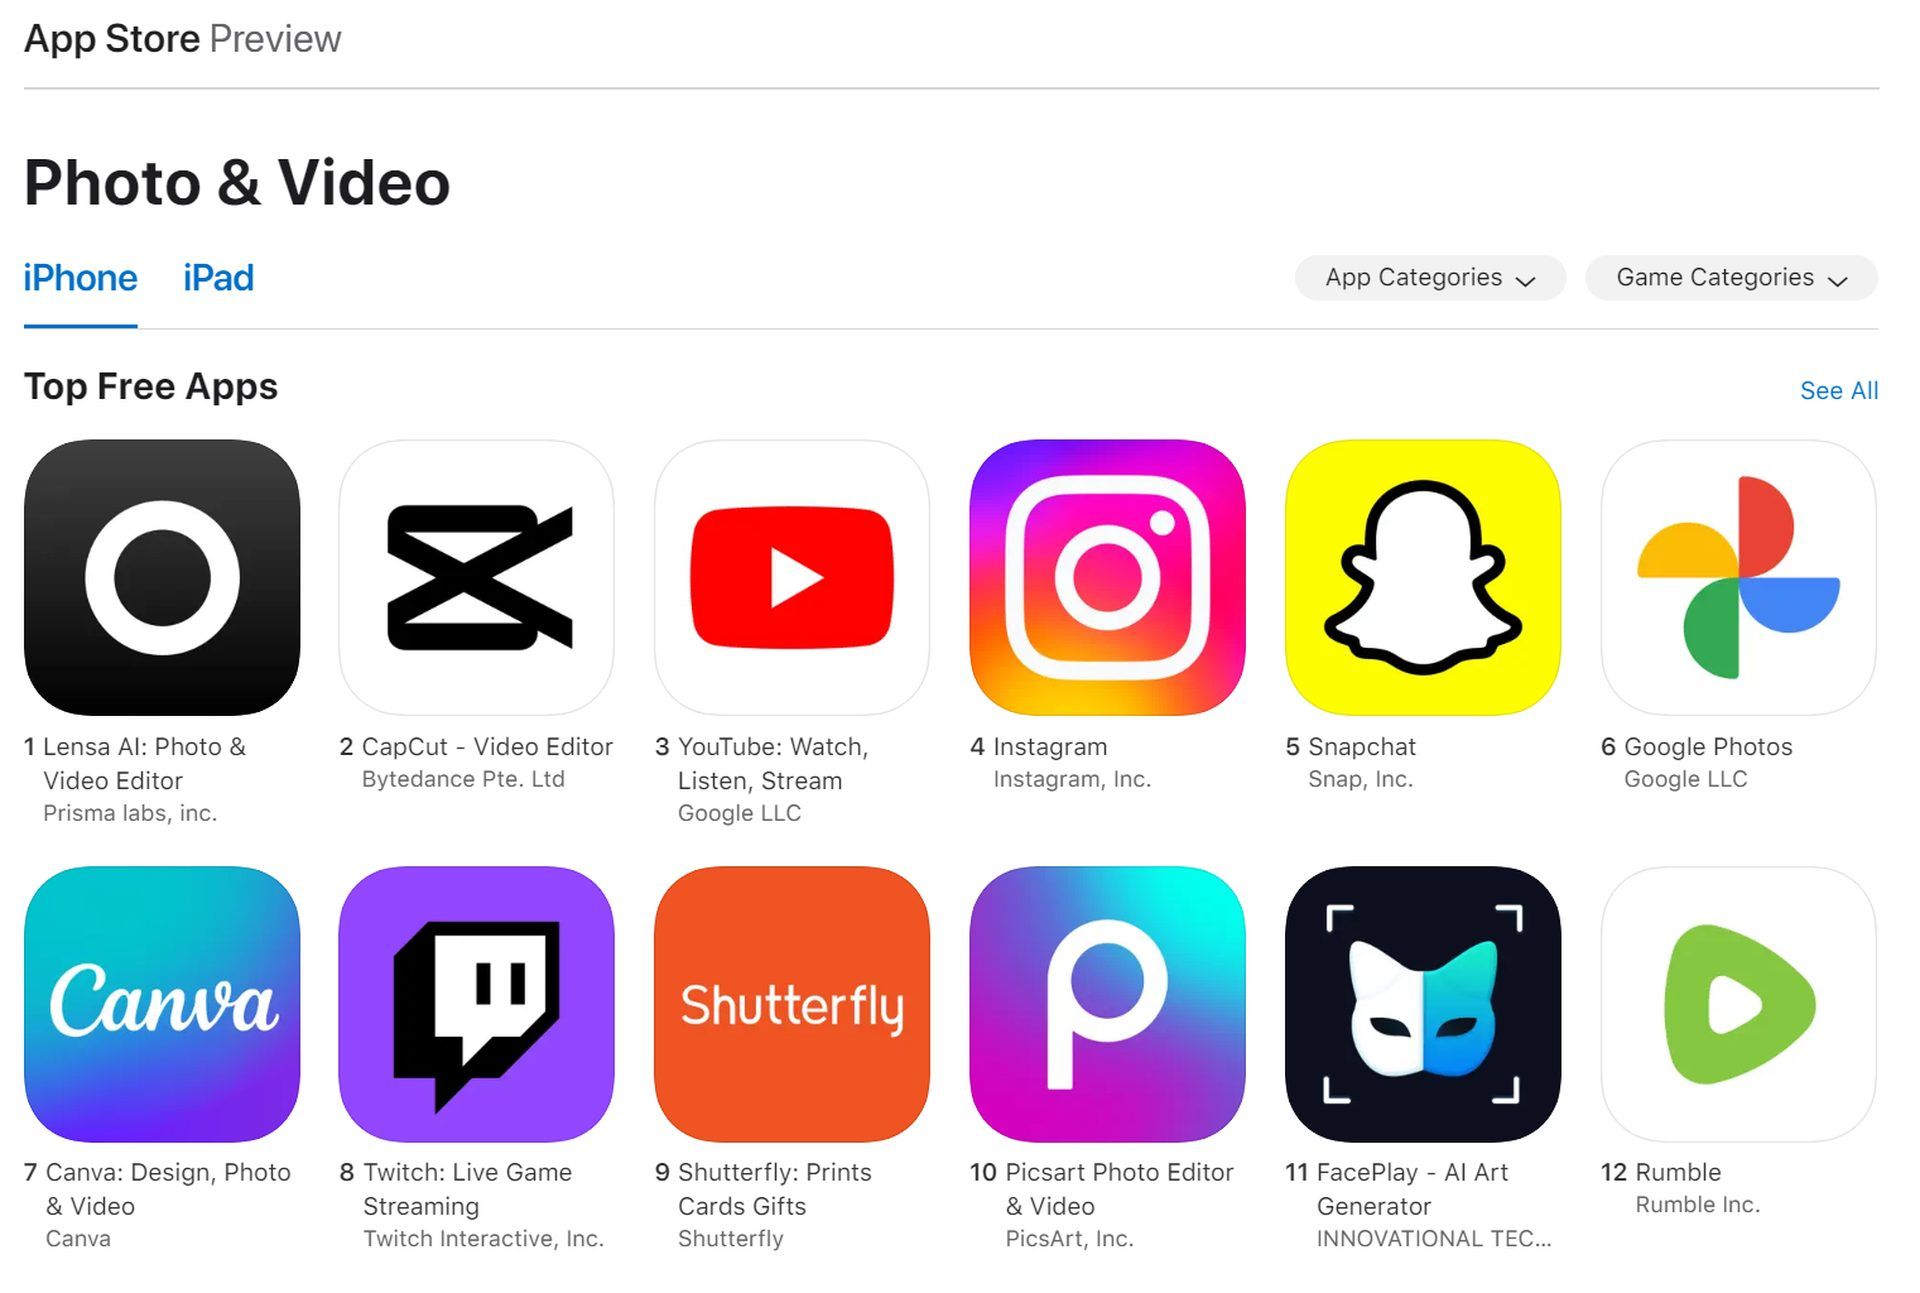 The new AI-powered selfie art feature makes Lensa AI the top photo and video app in the App Store